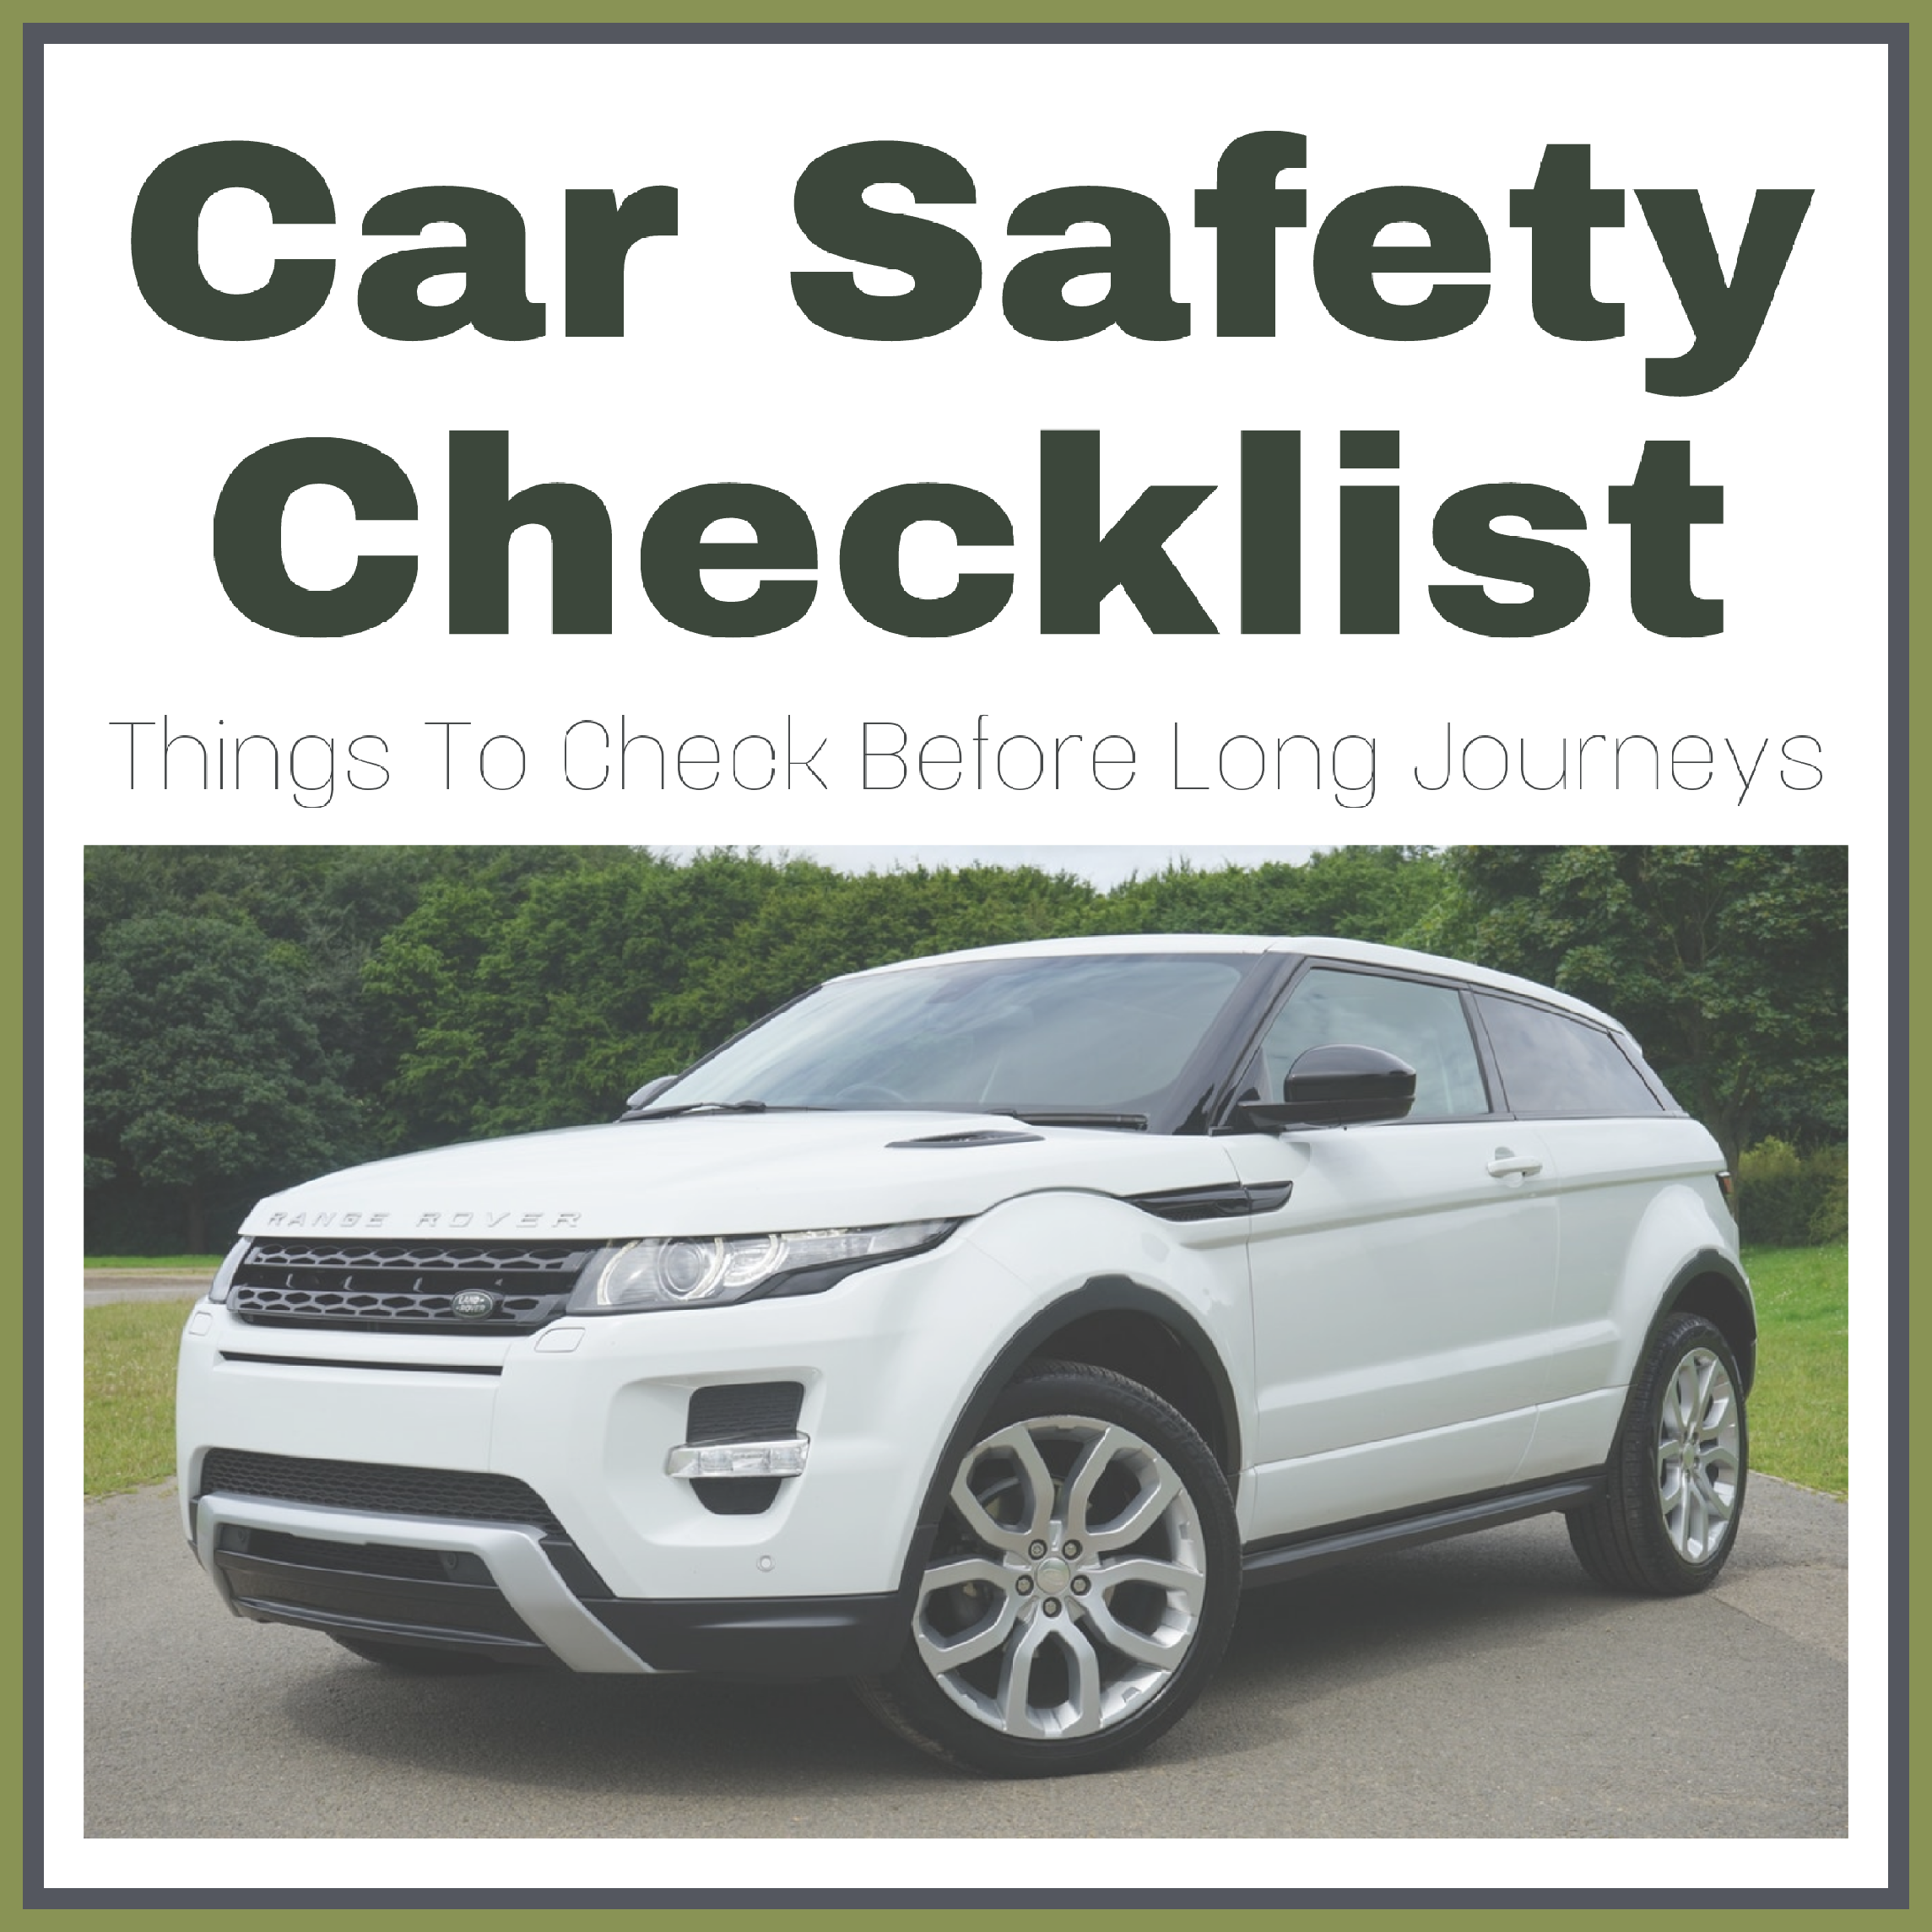 A picture of a white landrover with the caption Car Safety Checklist: Things To Check Before Long Journeys #CarSafetyChecklist Kwik Fit campaign image designed by Living Life Our Way.